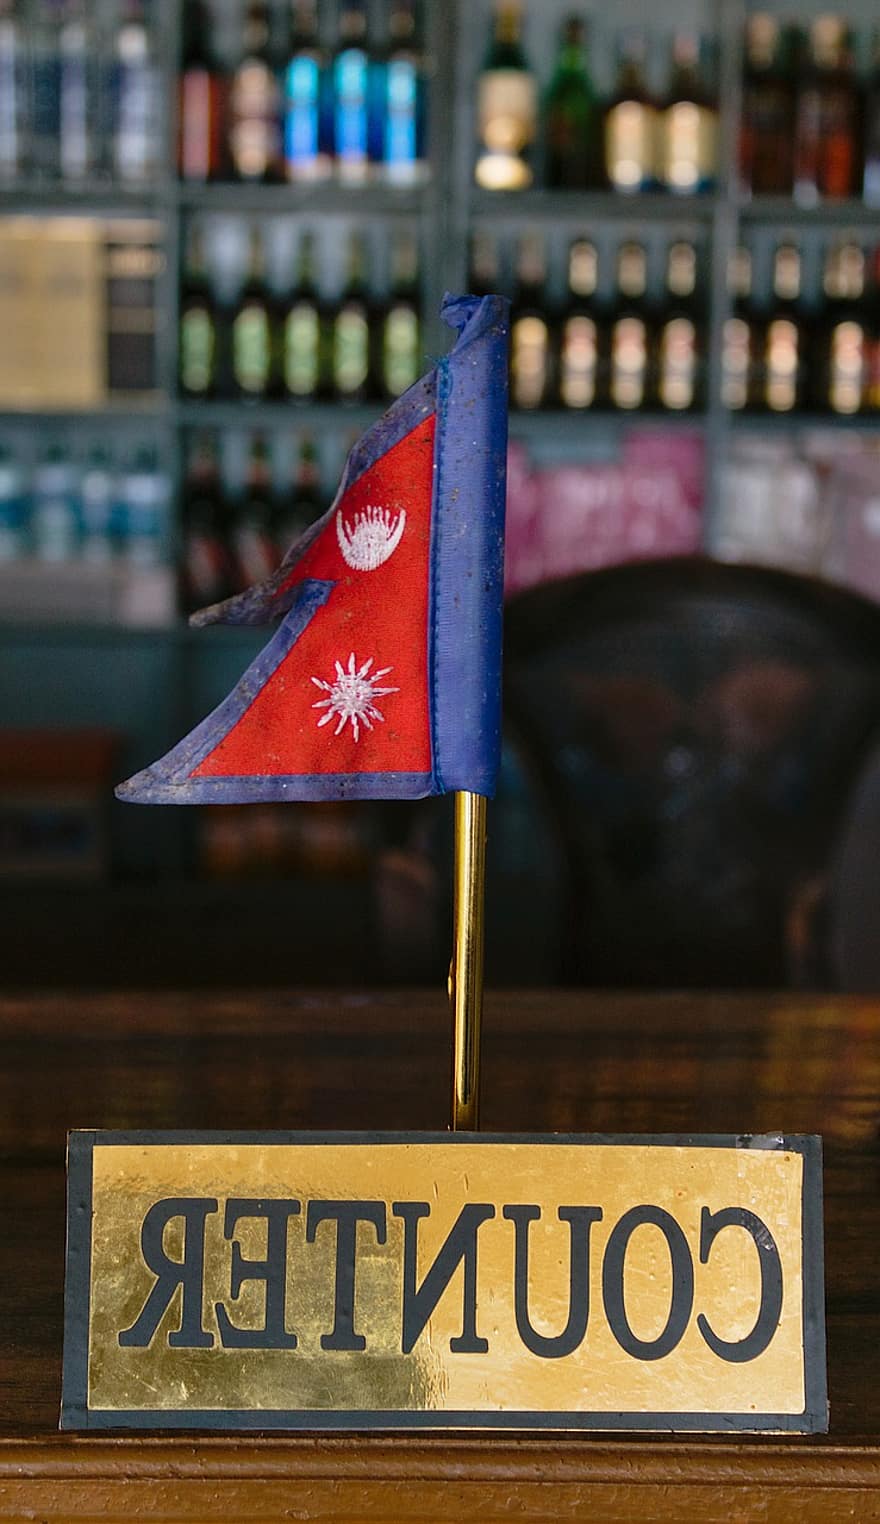 Nepal, Nepalese Flag, Restaurant, sign, tourism, travel, famous place, editorial, cultures, travel destinations, american flag